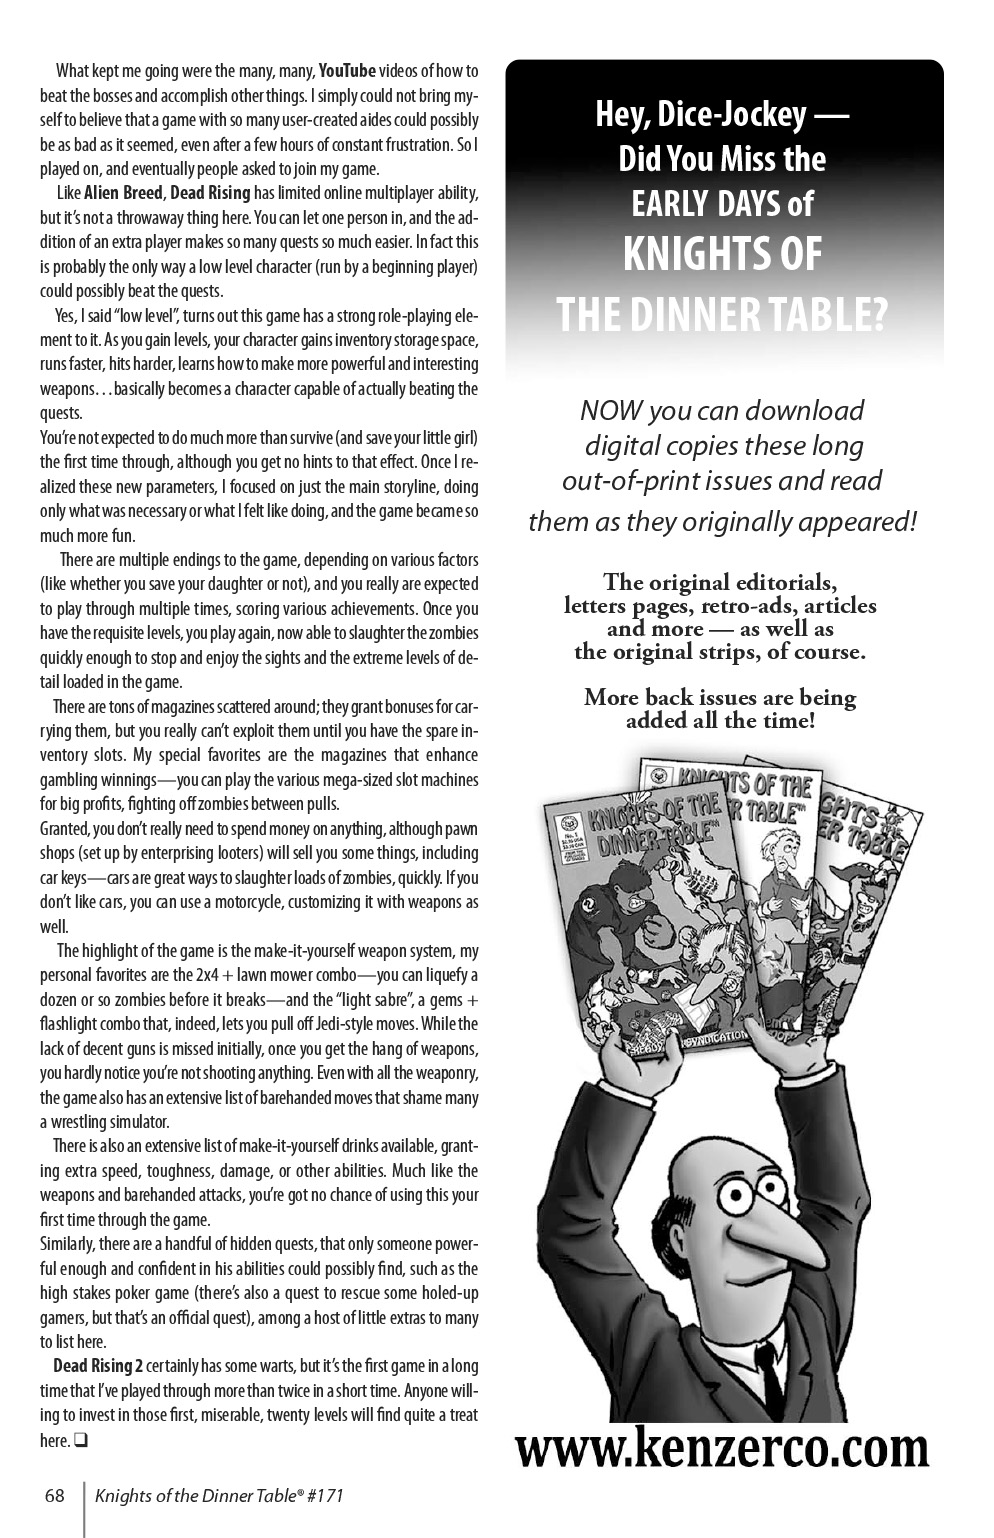 Read online Knights of the Dinner Table comic -  Issue #171 - 70